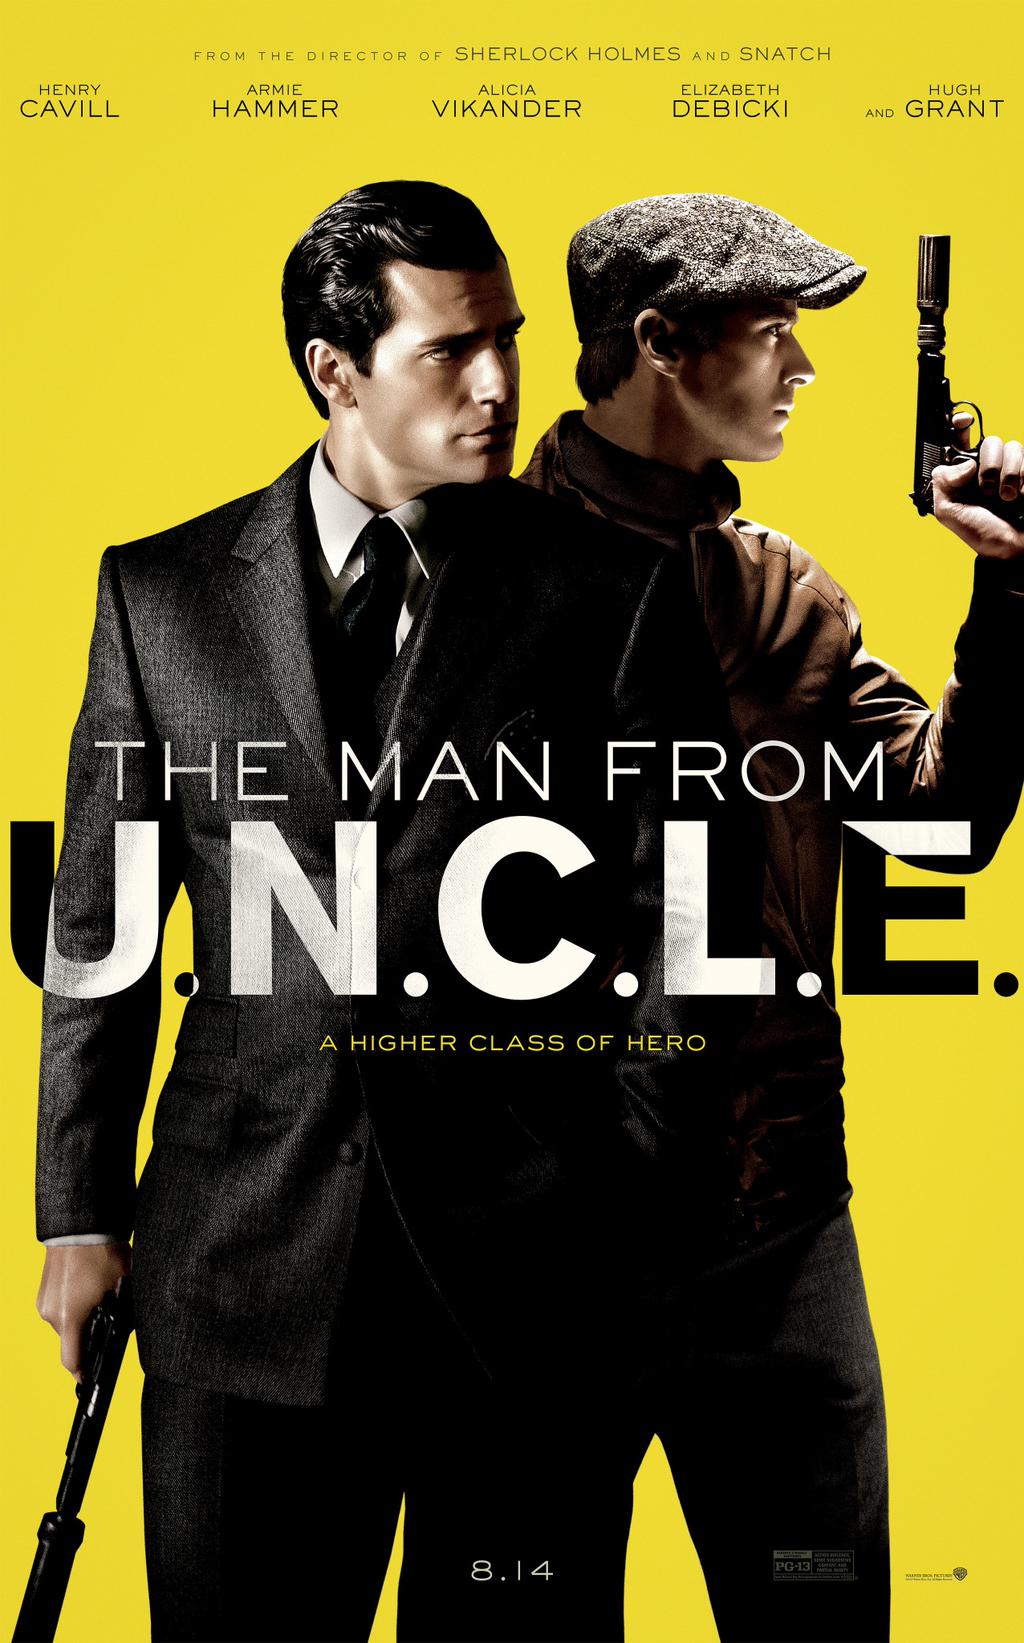 The-Man-from-Uncle-Poster.jpg